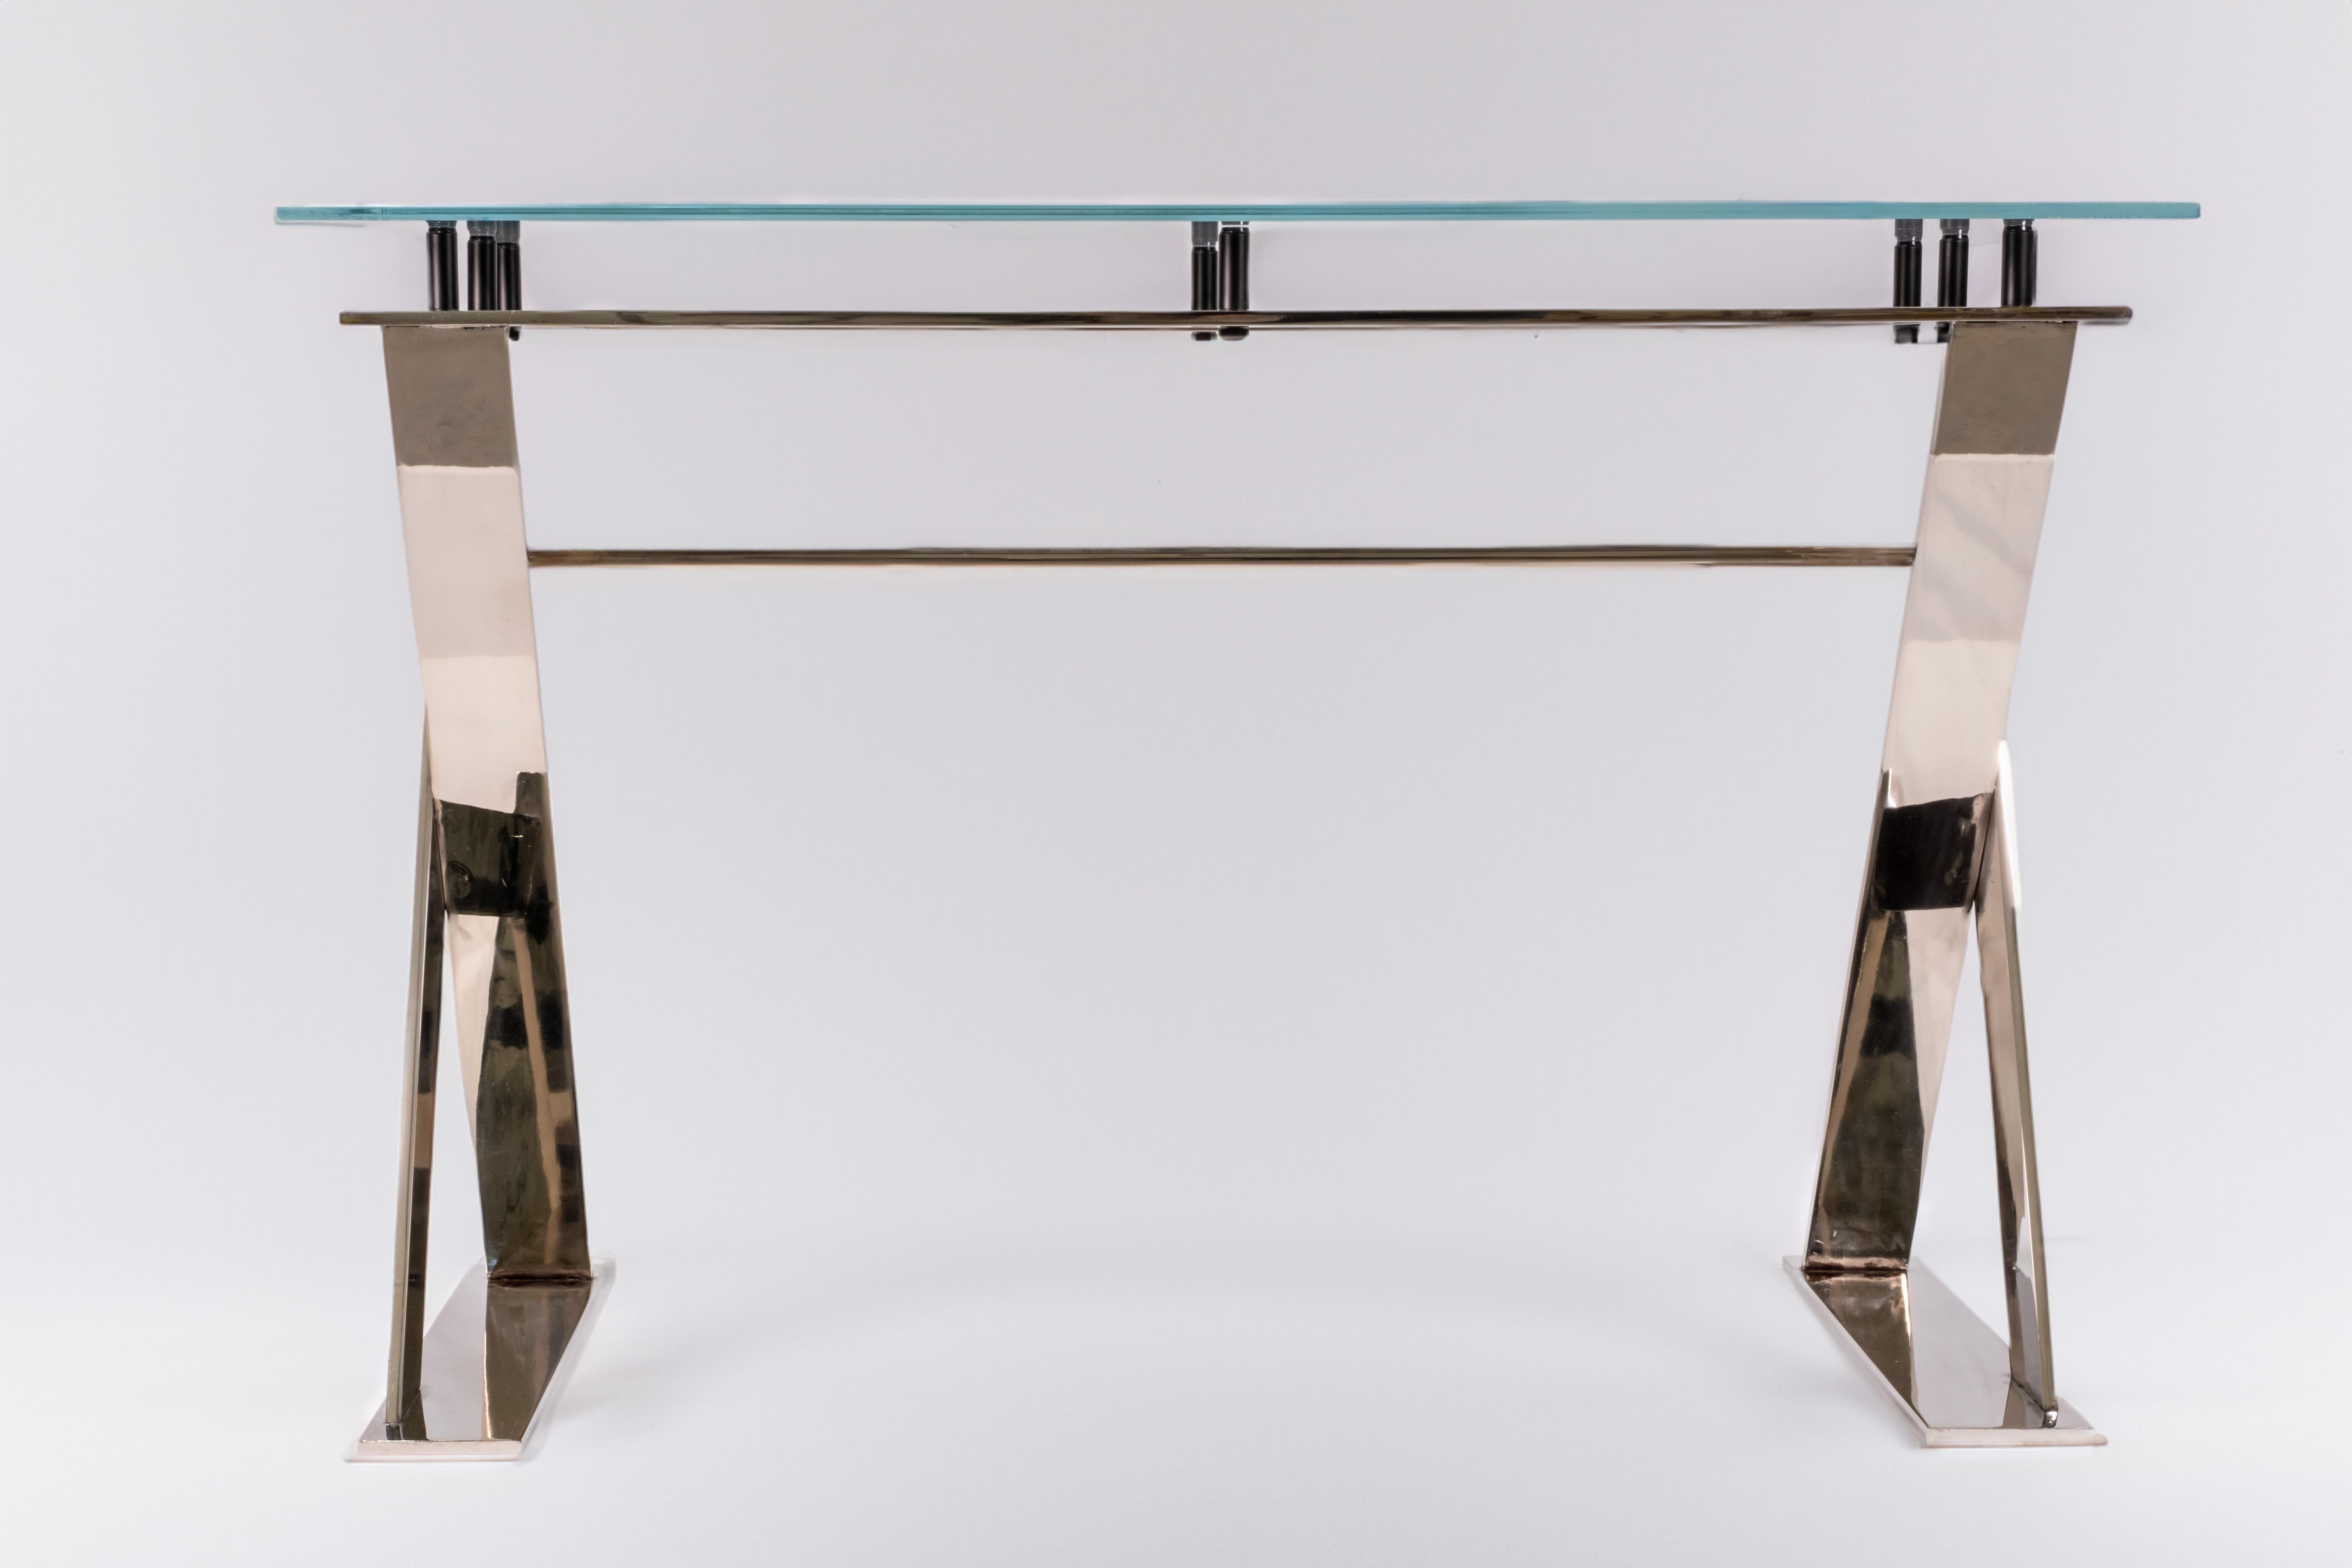 Introducing our exquisite nickel-plated criss-cross desk, meticulously handcrafted in our Westhampton Beach, NY studio. This stunning piece is expertly fashioned from hand-cut and polished steel, resulting in a flawless finish. The desk is